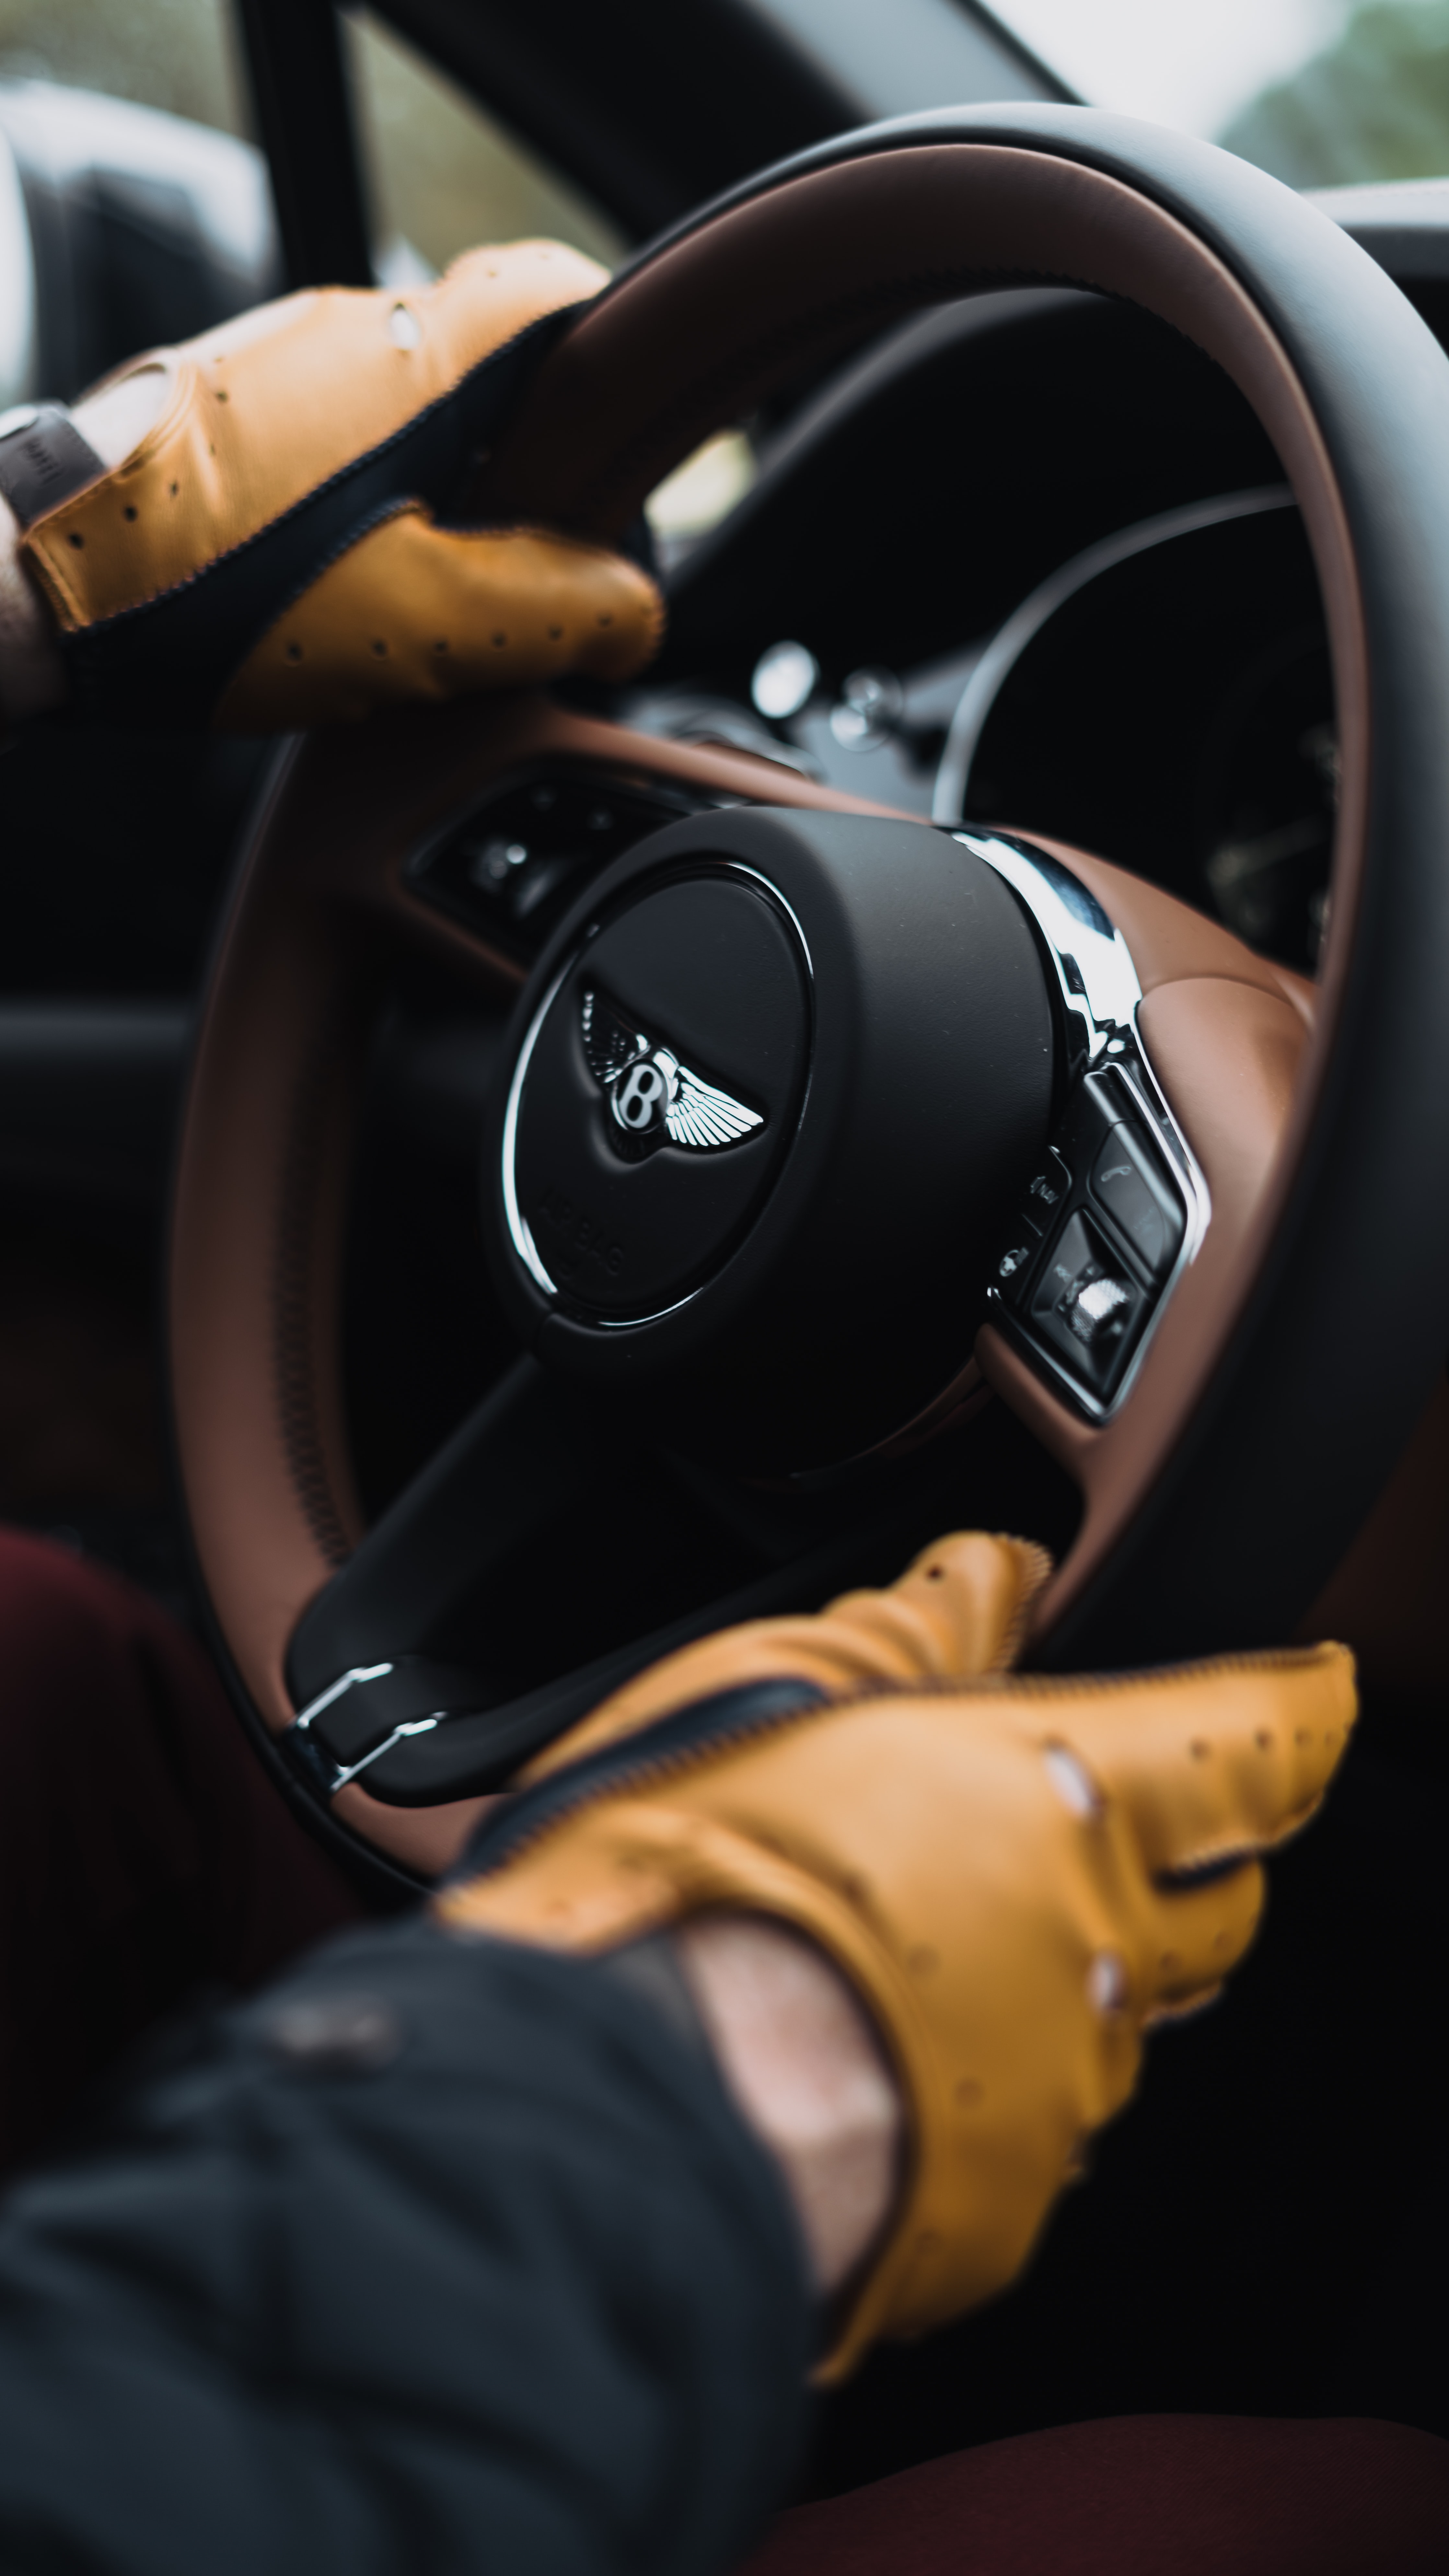 125840 Screensavers and Wallpapers Steering Wheel for phone. Download bentley, cars, car, hands, steering wheel, rudder, gloves pictures for free